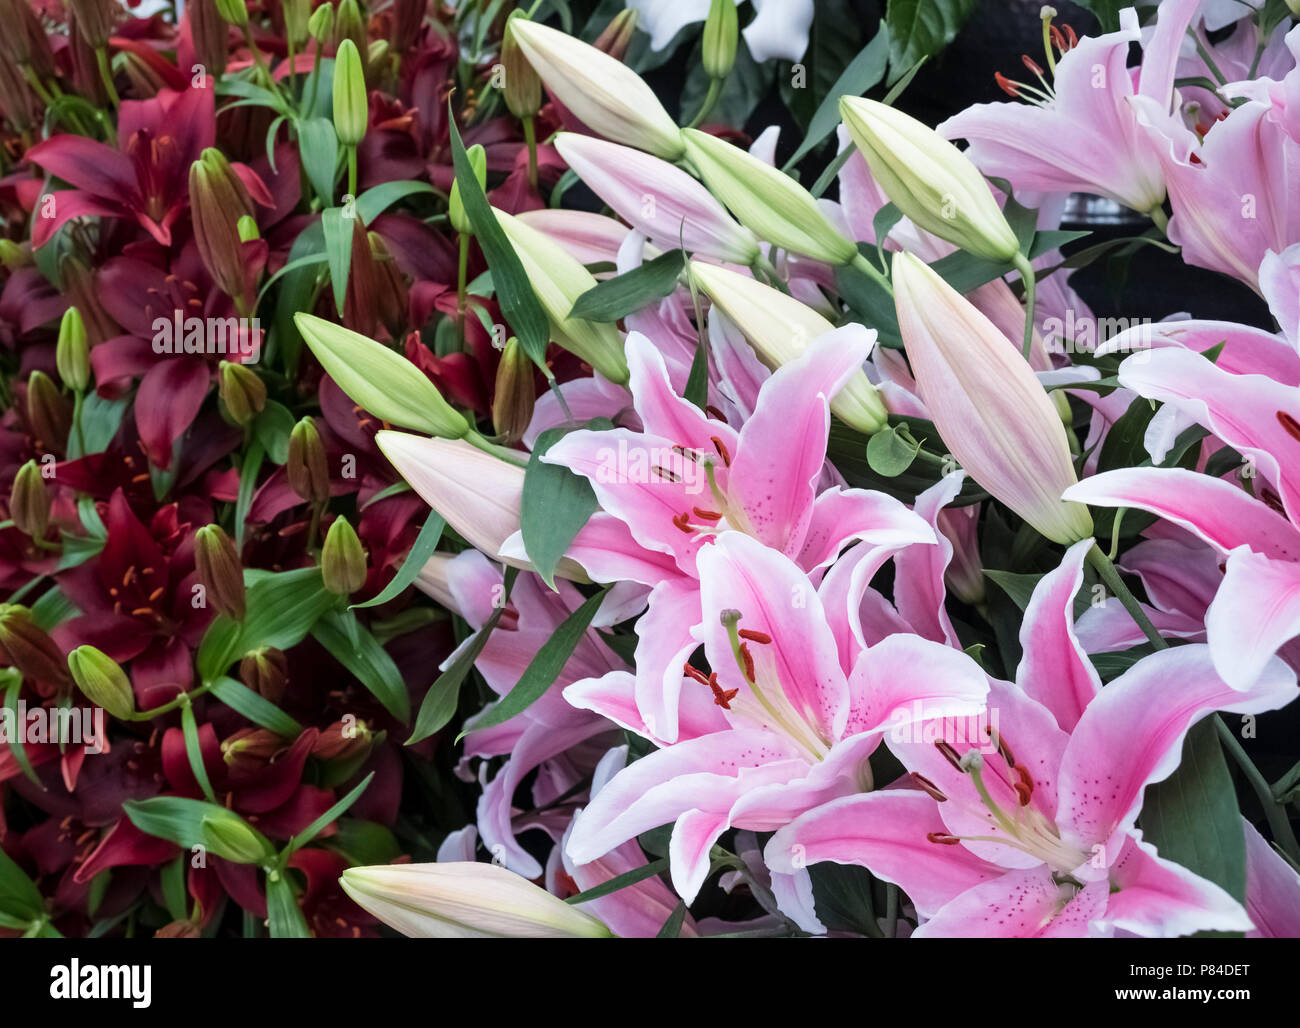 Display of flowering Lilies (aka Oriental Lily), featuring pink Lilium Sorbonne. Stock Photo